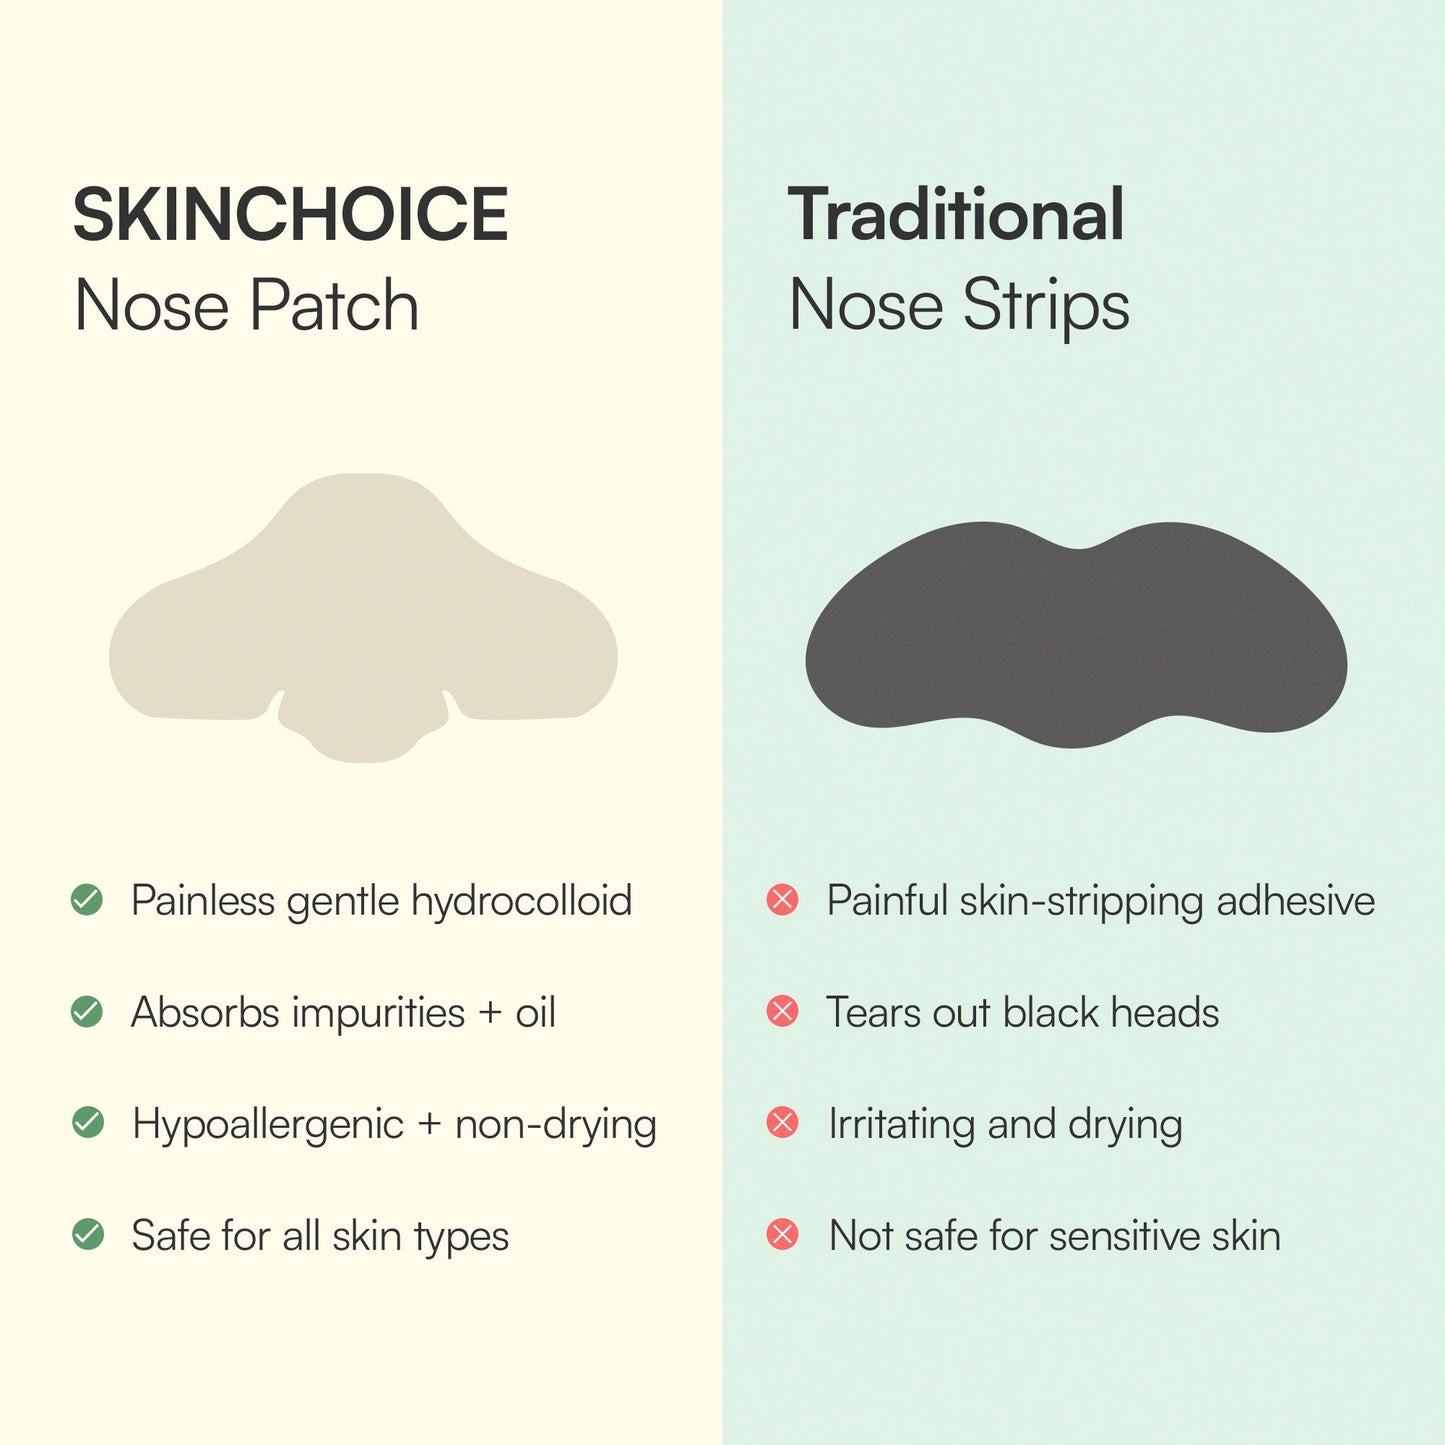 Skinchoice Nose Patch